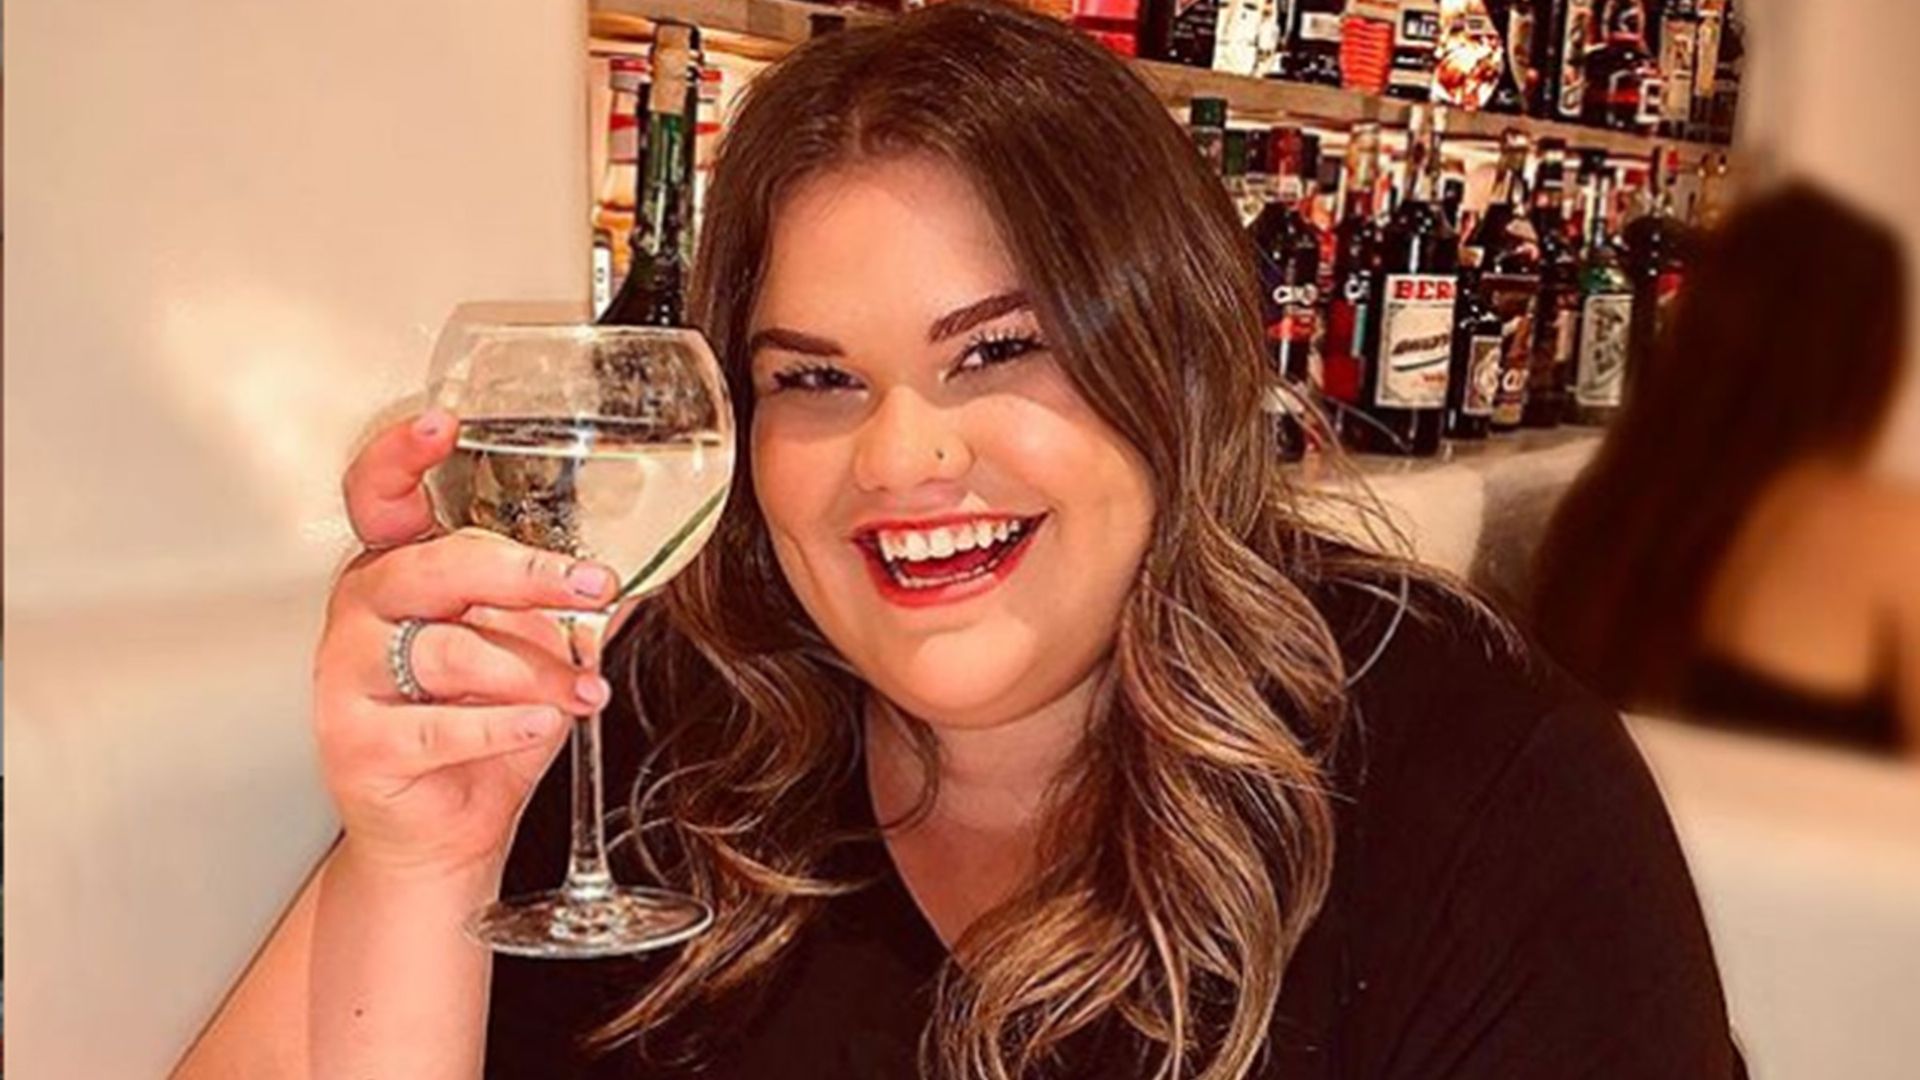 Gogglebox's Amy Tapper reacts to 'backhanded compliments' after displaying three-stone weight loss